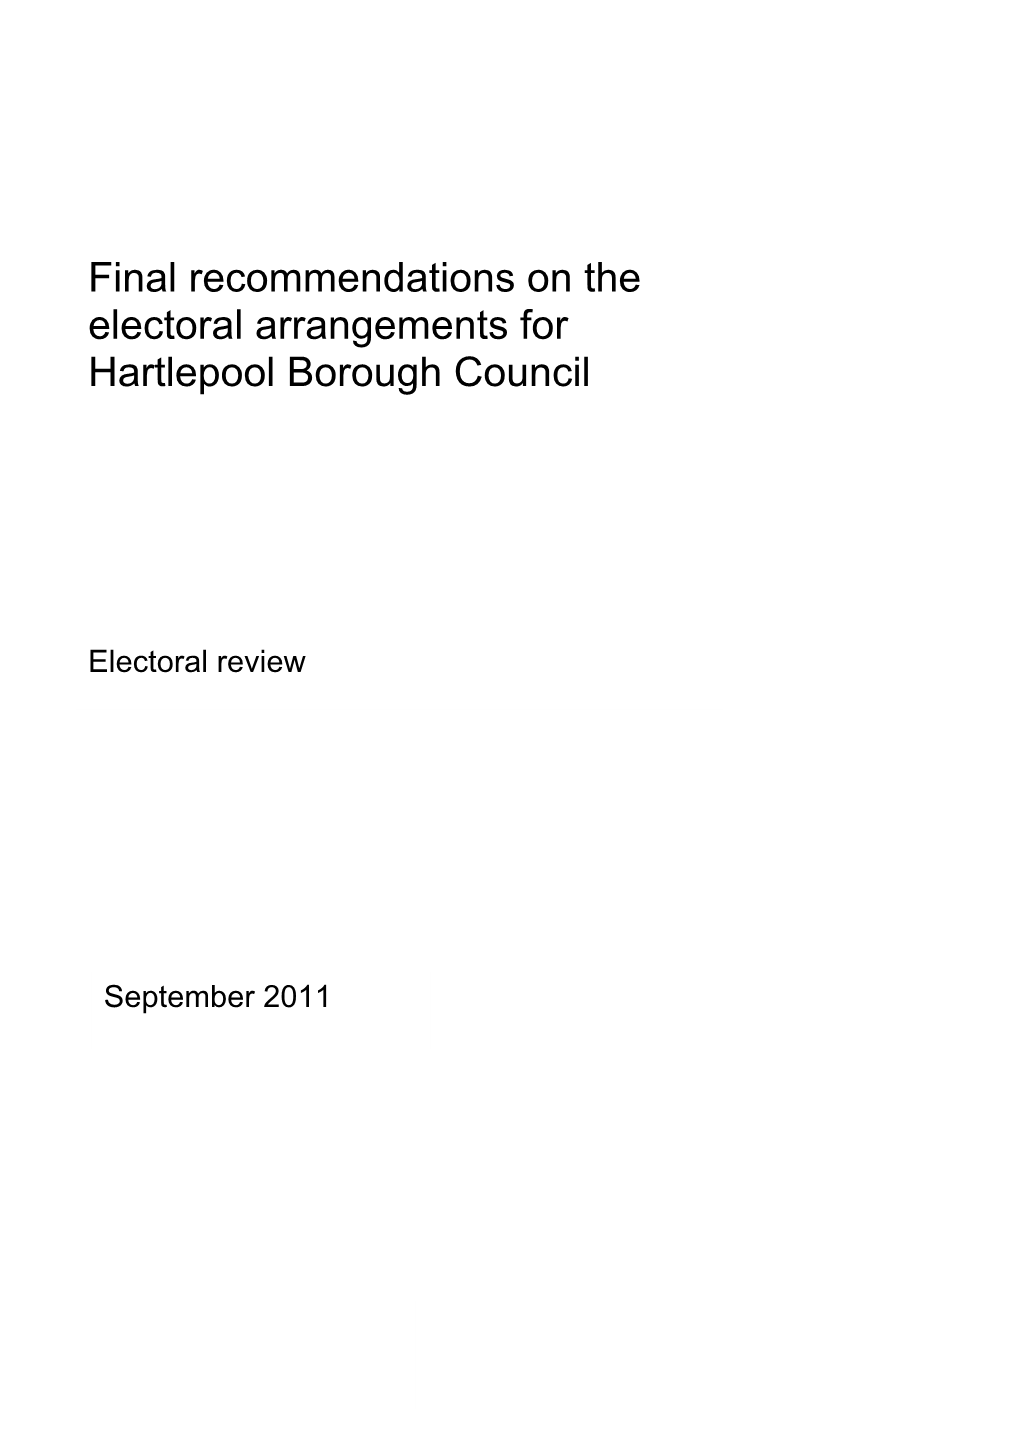 Final Recommendations on the Electoral Arrangements for Hartlepool Borough Council